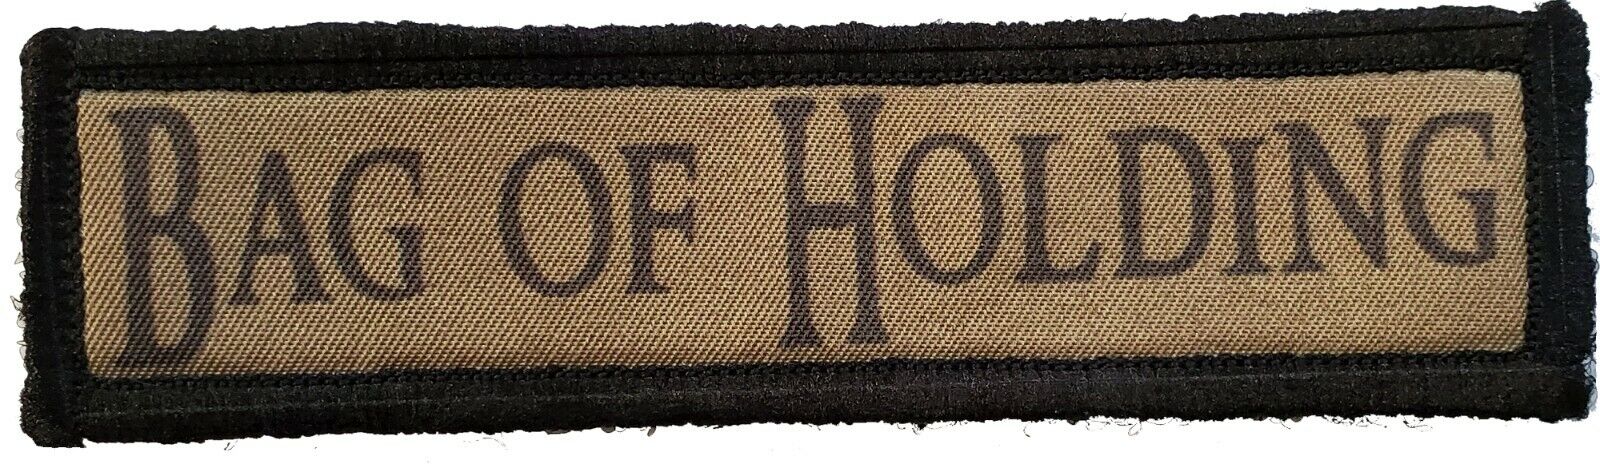 Bag of Holding Morale Patch Military Dungeon Role playing Patch